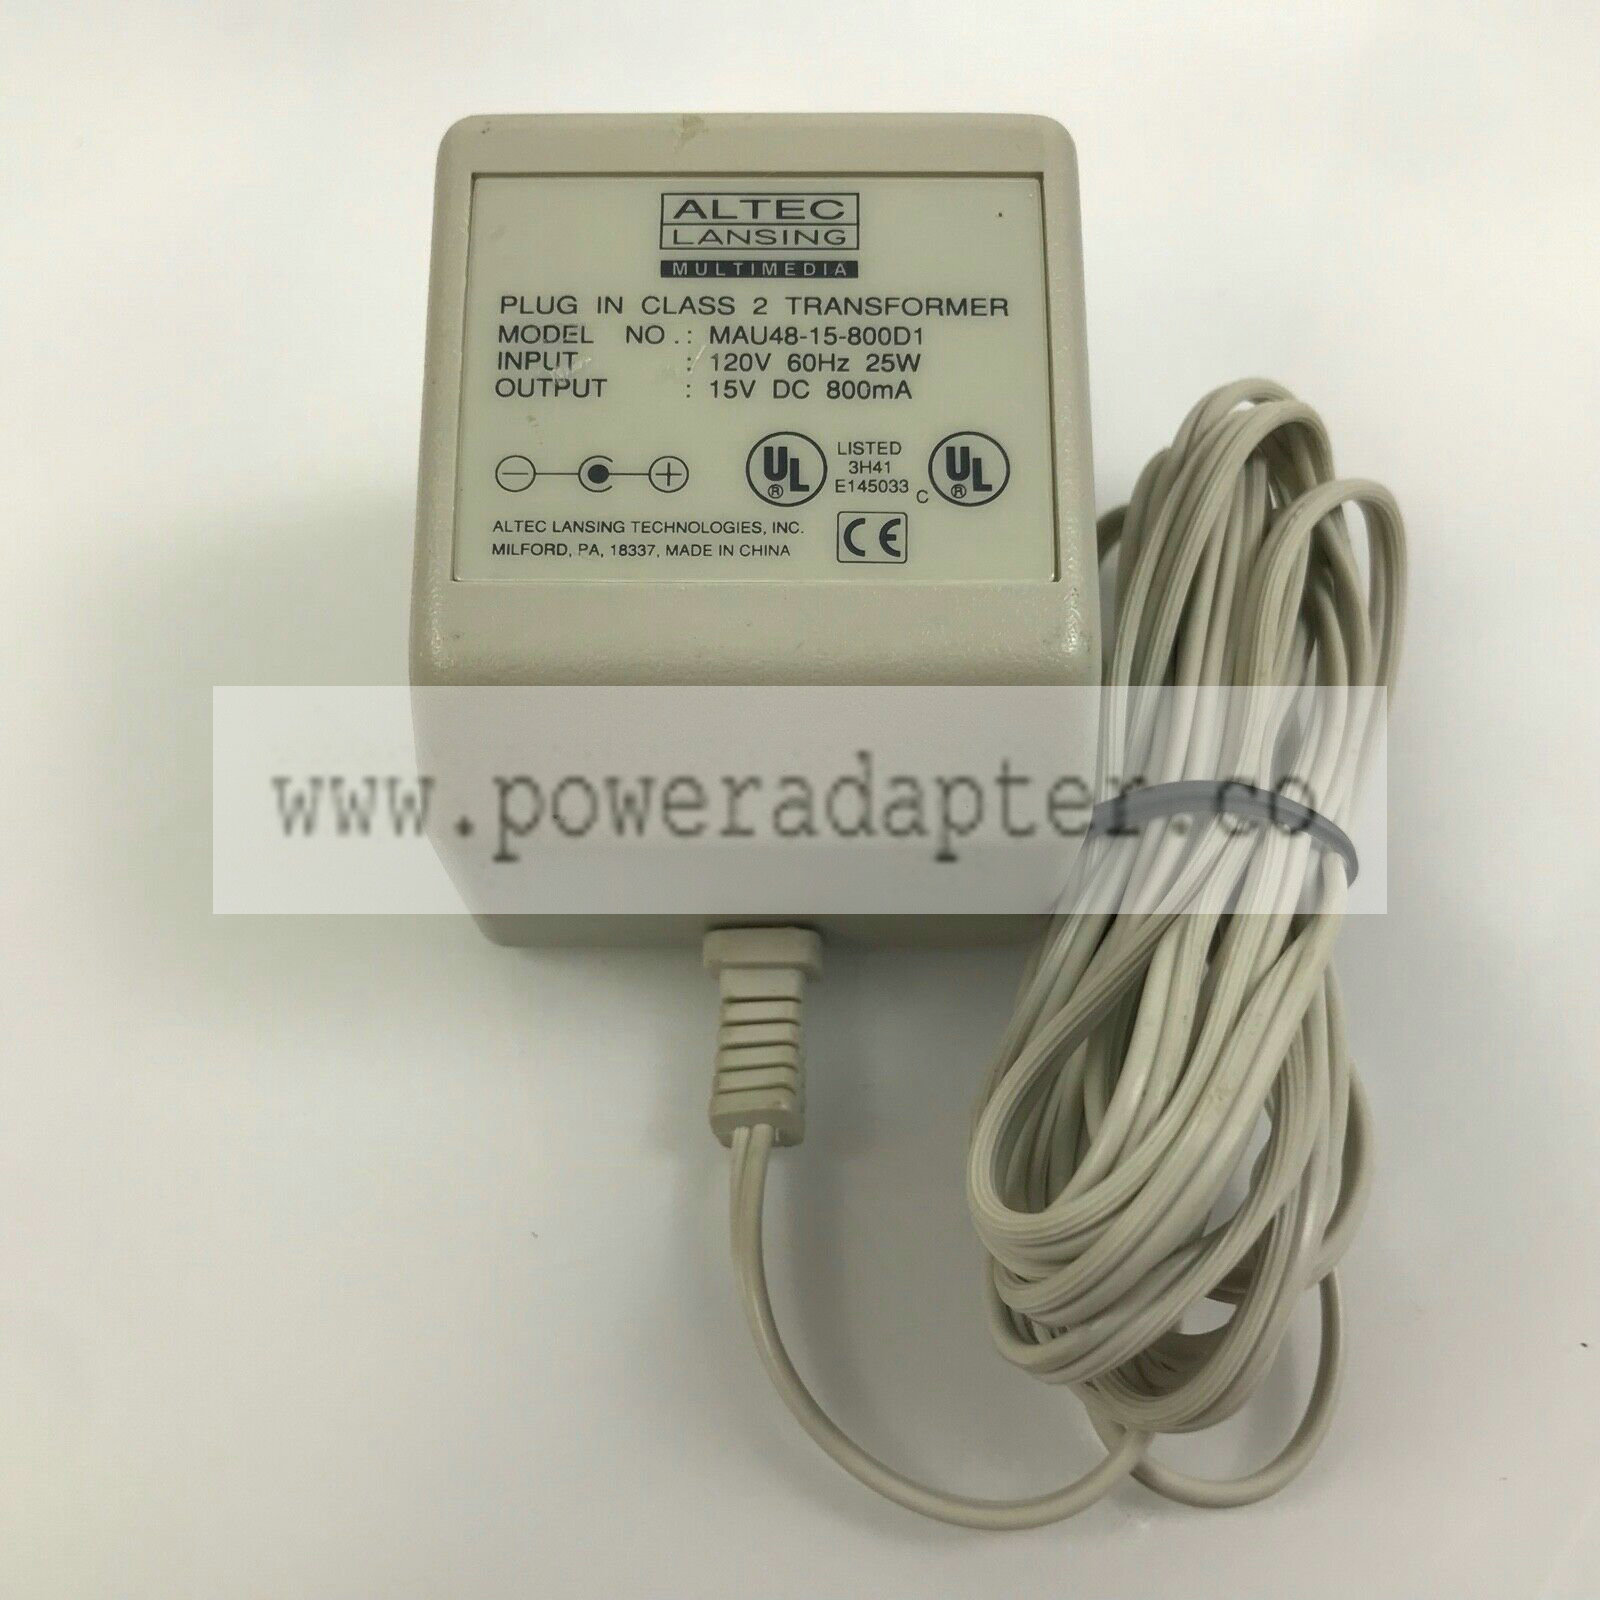 Altec Lansing MAU48-15-800D1 Plug-In Class 2 Transformer AC Adapter DC 15V 7.L1 Type: AC/AC Adapter Brand: Altec Lans - Click Image to Close